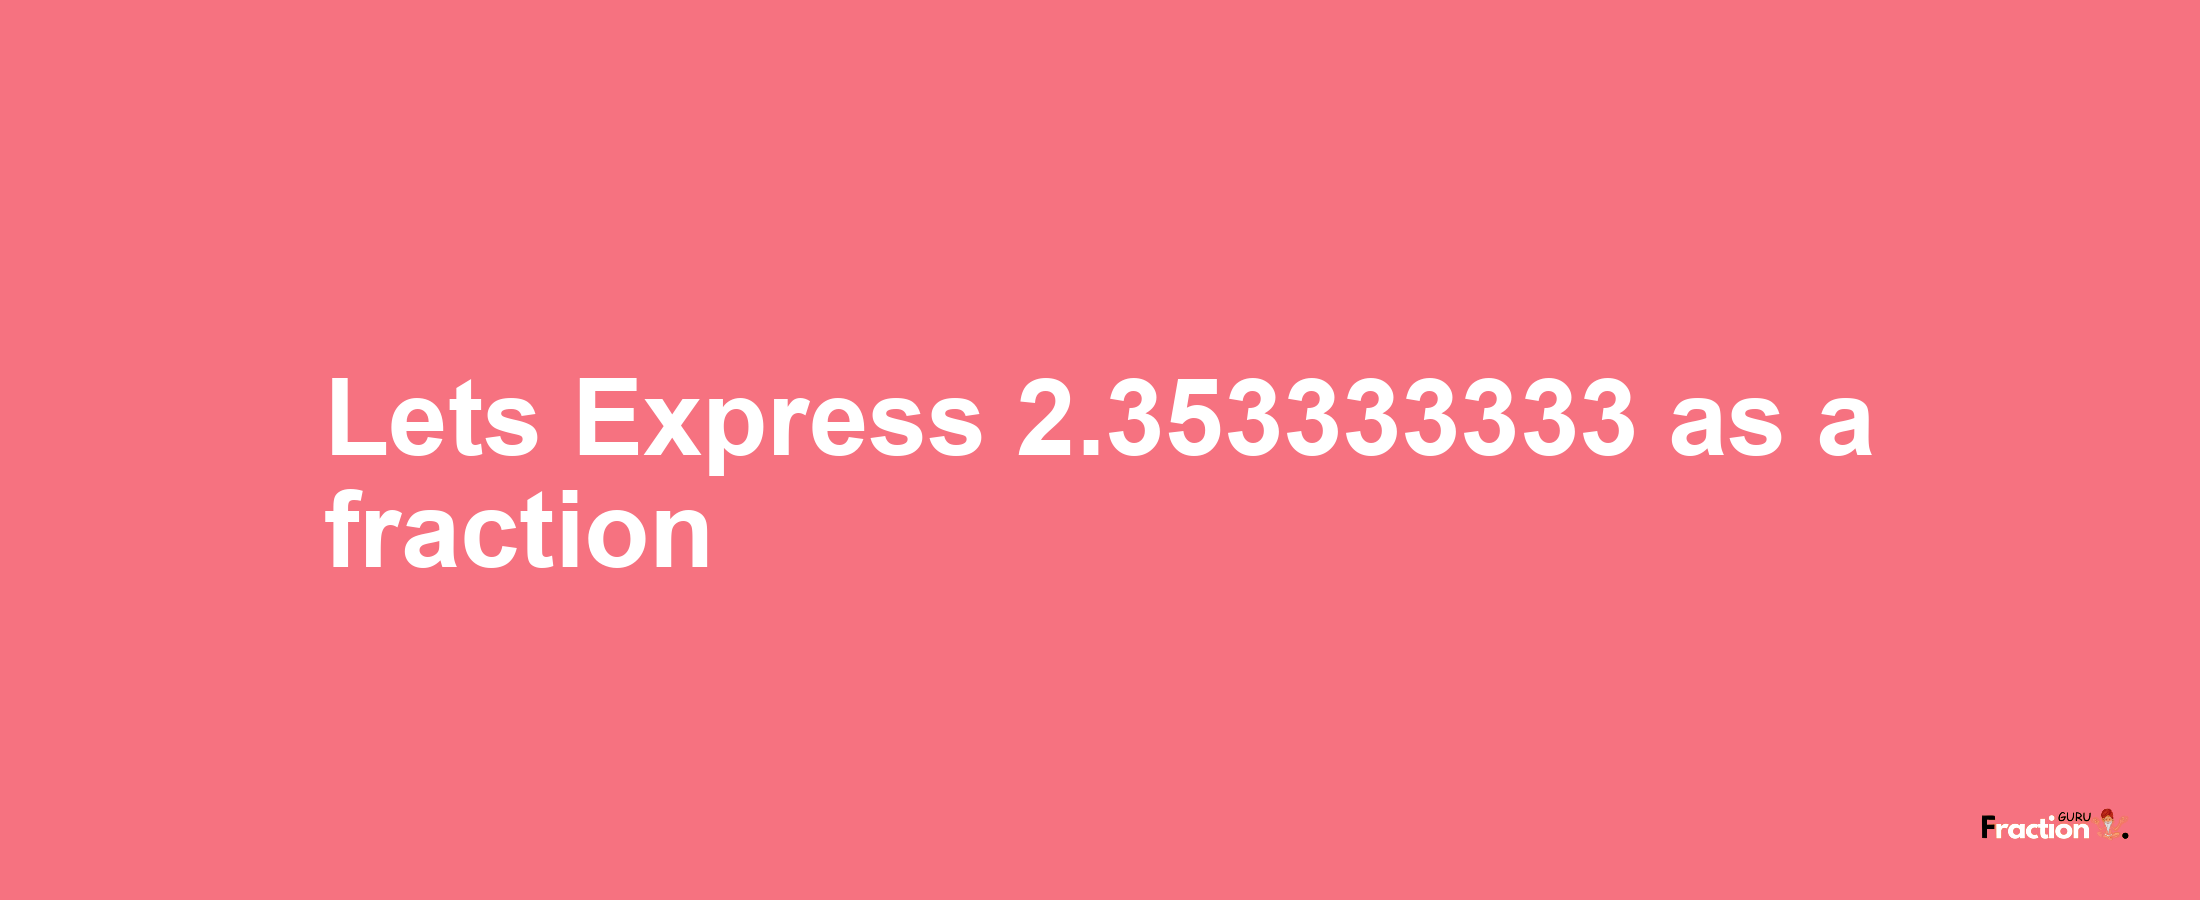 Lets Express 2.353333333 as afraction